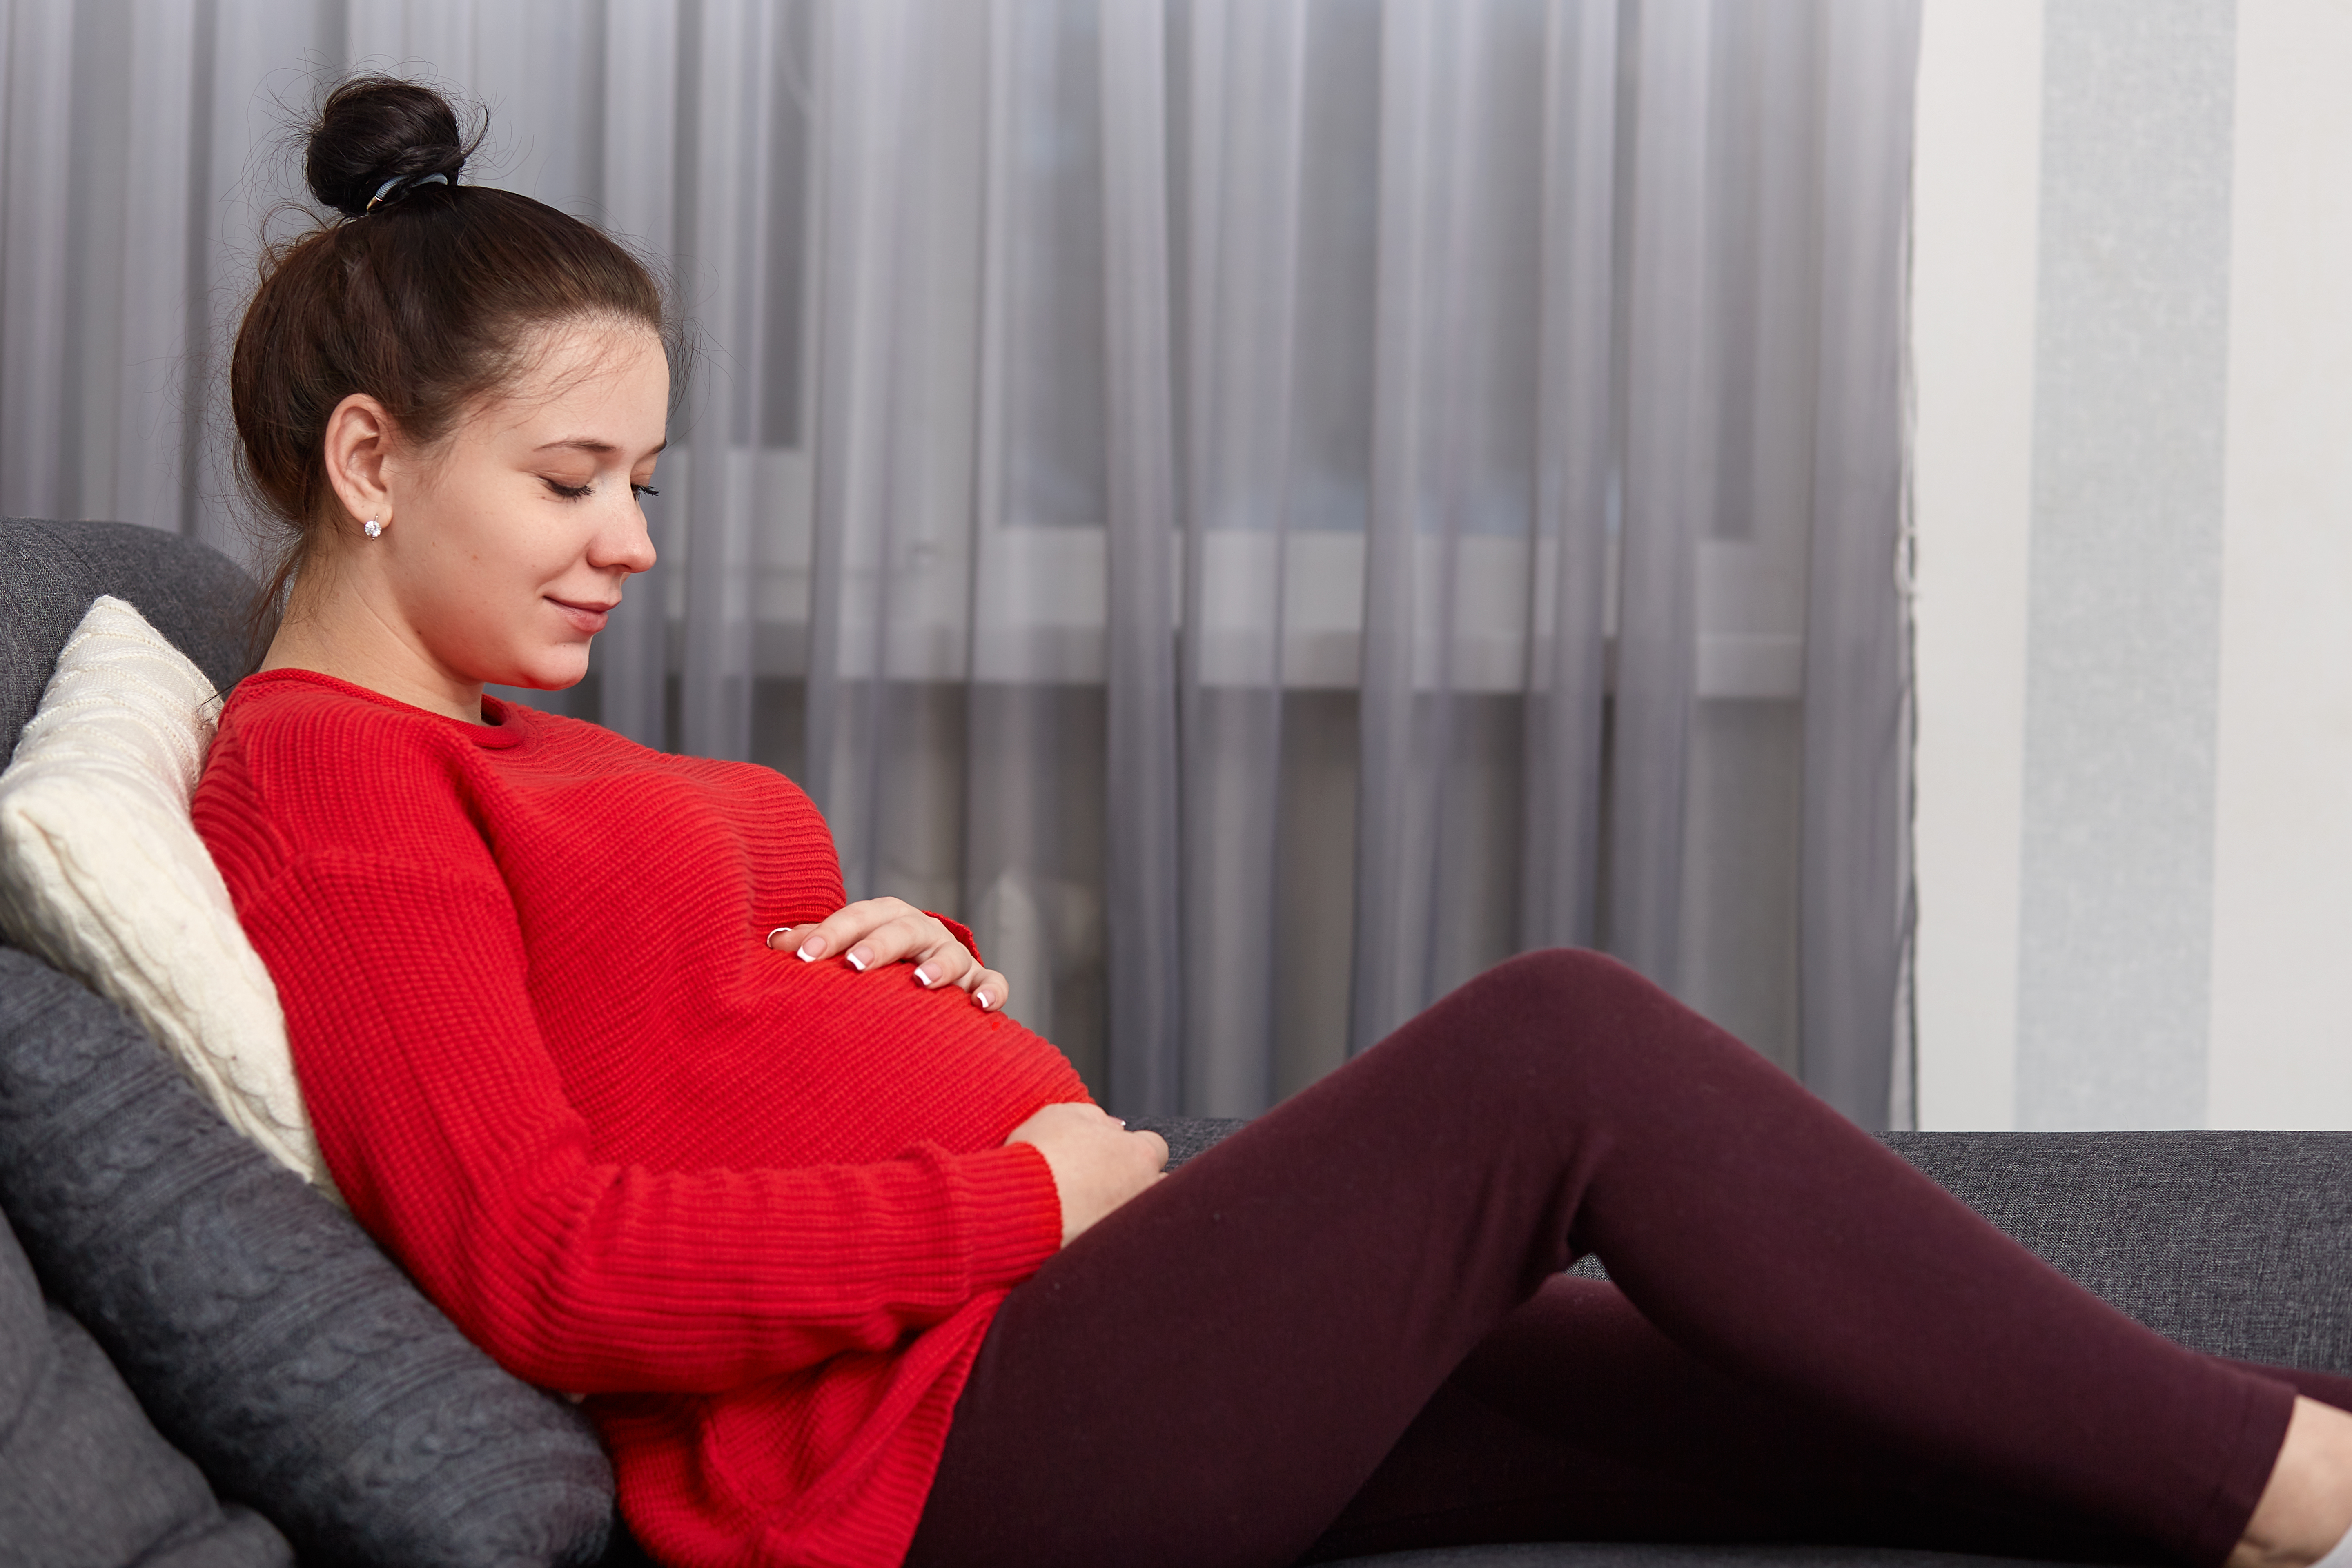 Everything You Need to Know About the First Trimester Pregnancy: Tips, Lists, and What to Avoid